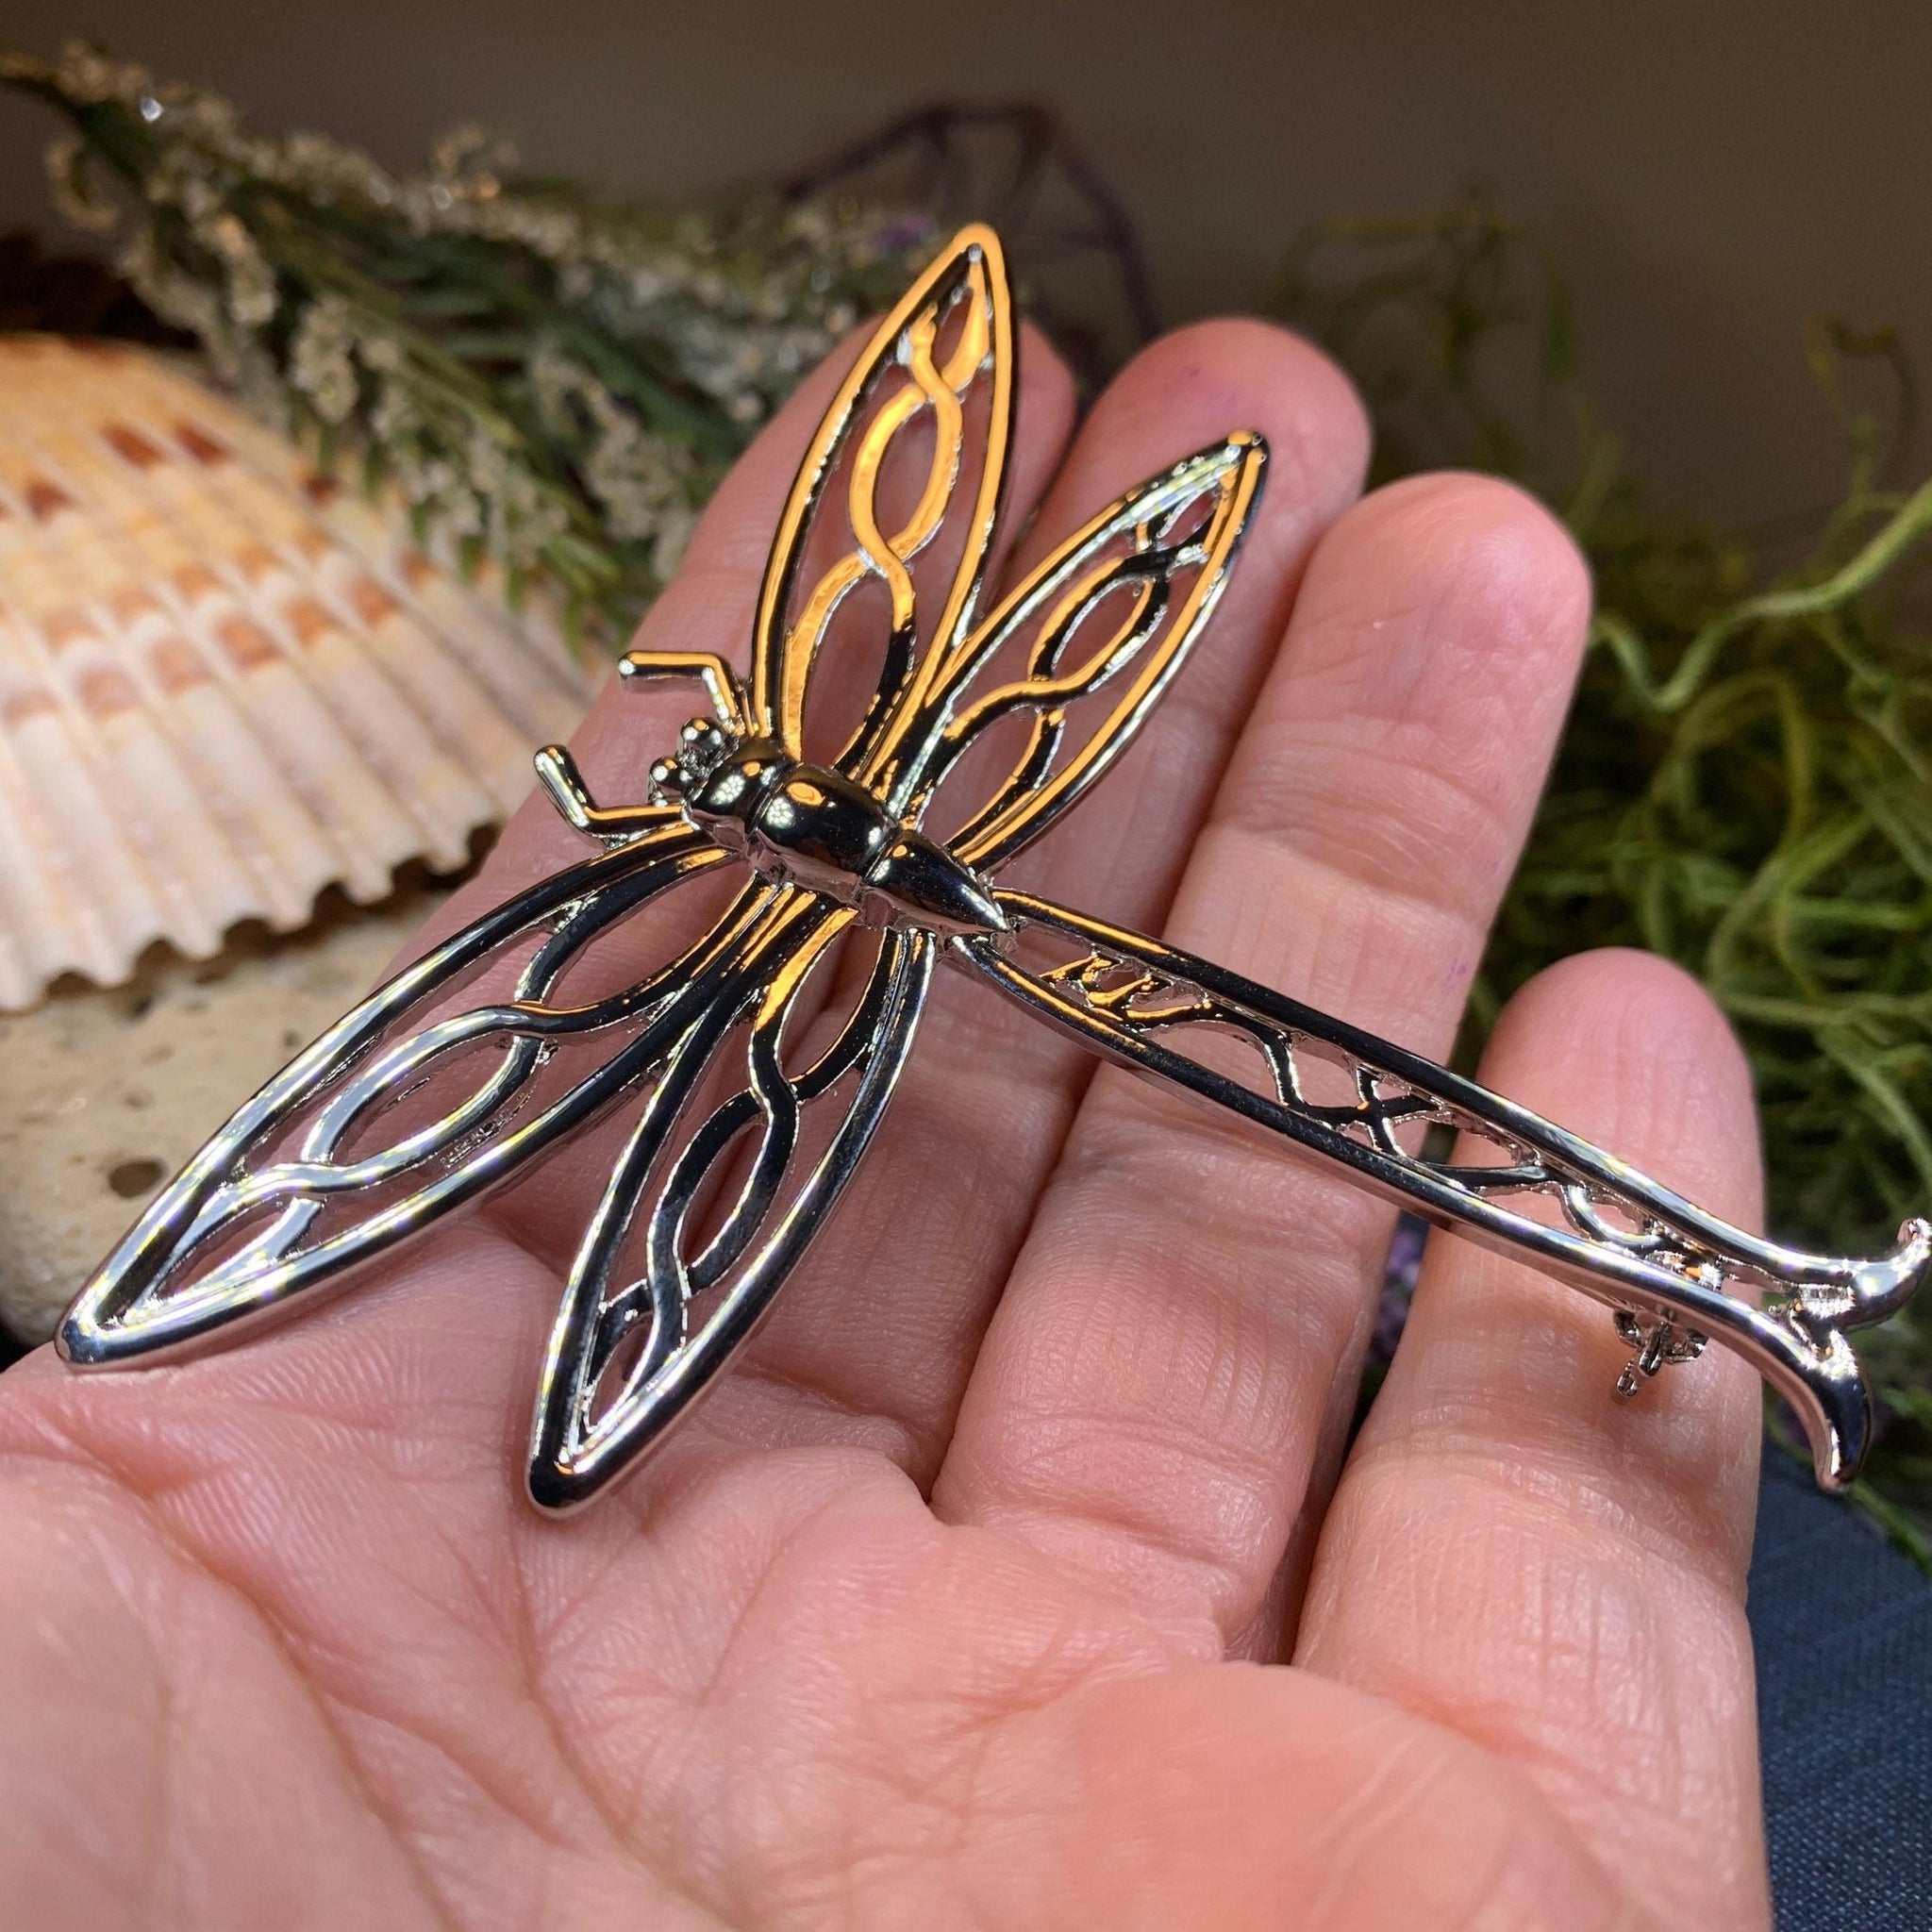 Dragonfly brooch, dragon brooches, dragonfly pin, brooches, pins, gifts for  women, Beautiful gift, Women's Brooches & Pins 